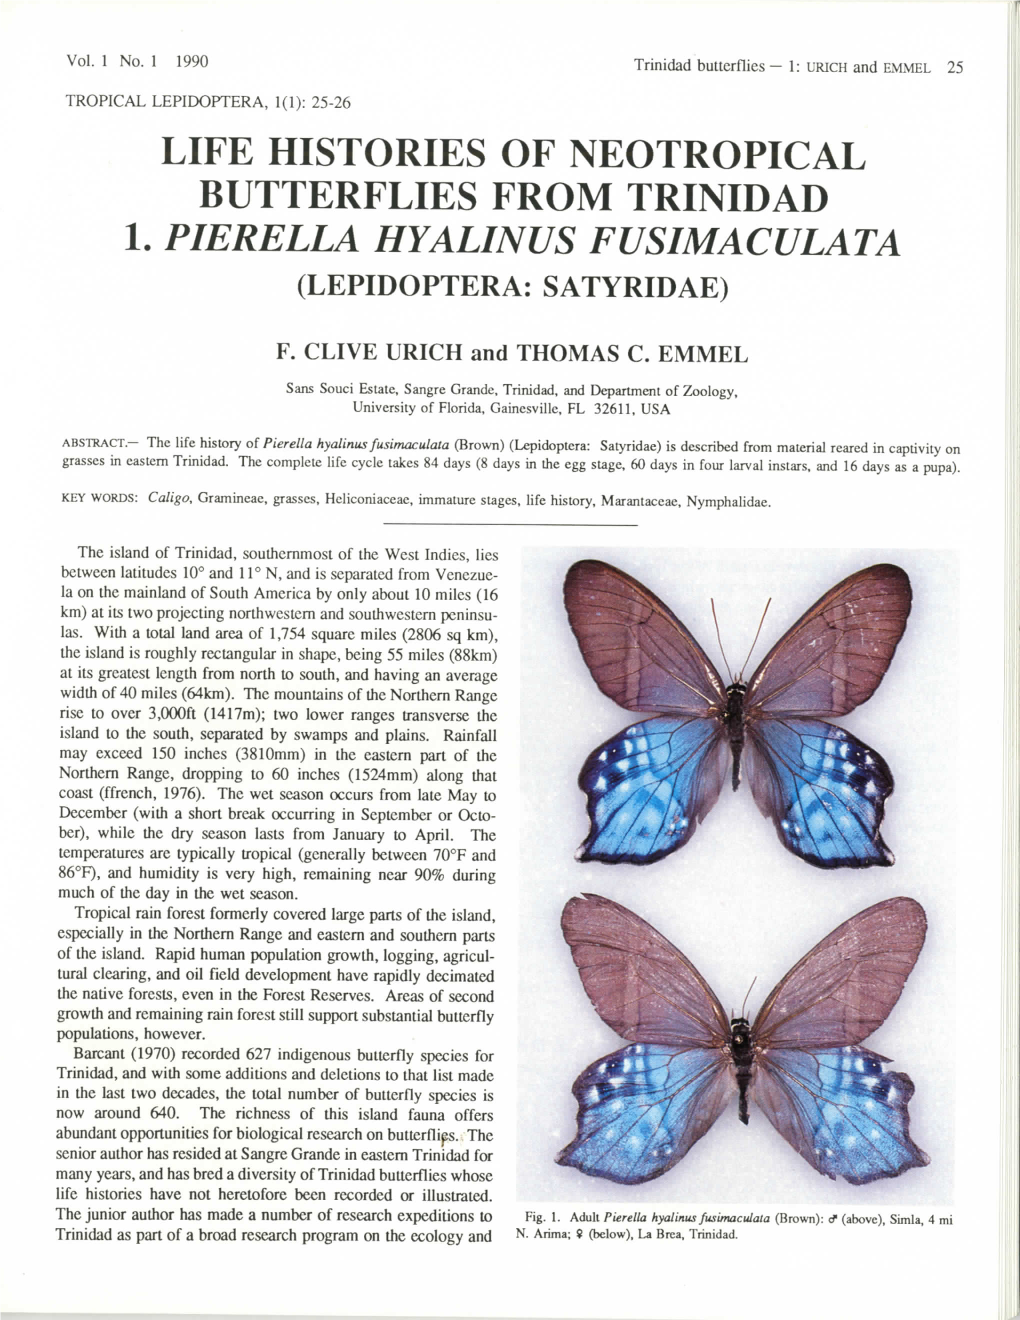 Life Histories of Neotropical Butterflies from Trinidad 1